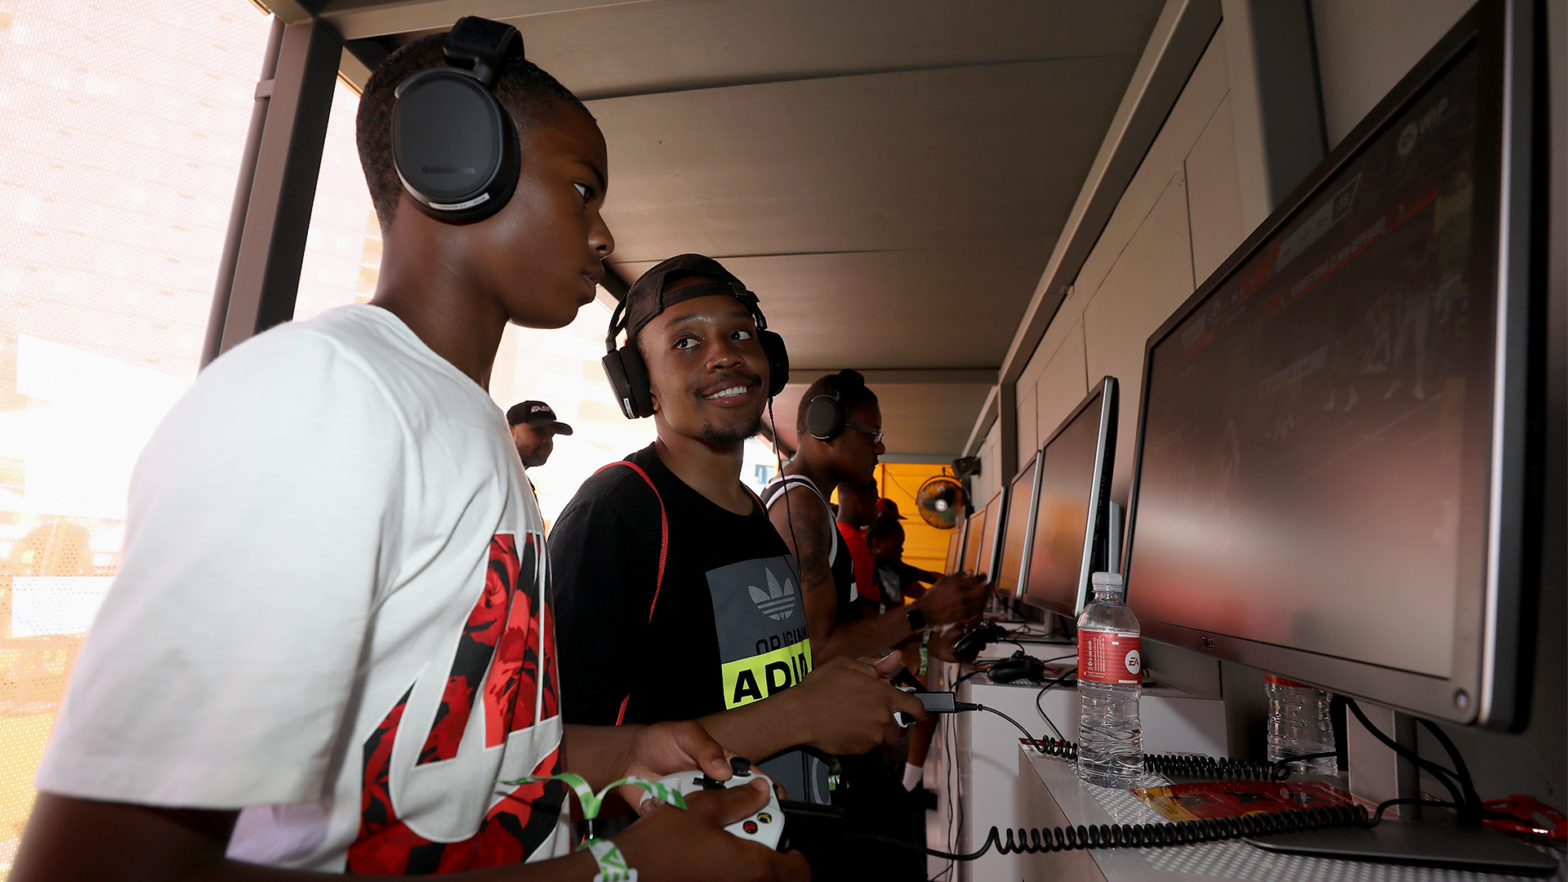 NFL To Hold Second Annual Madden Tournament For HBCU Students During Super Bowl LVI Week